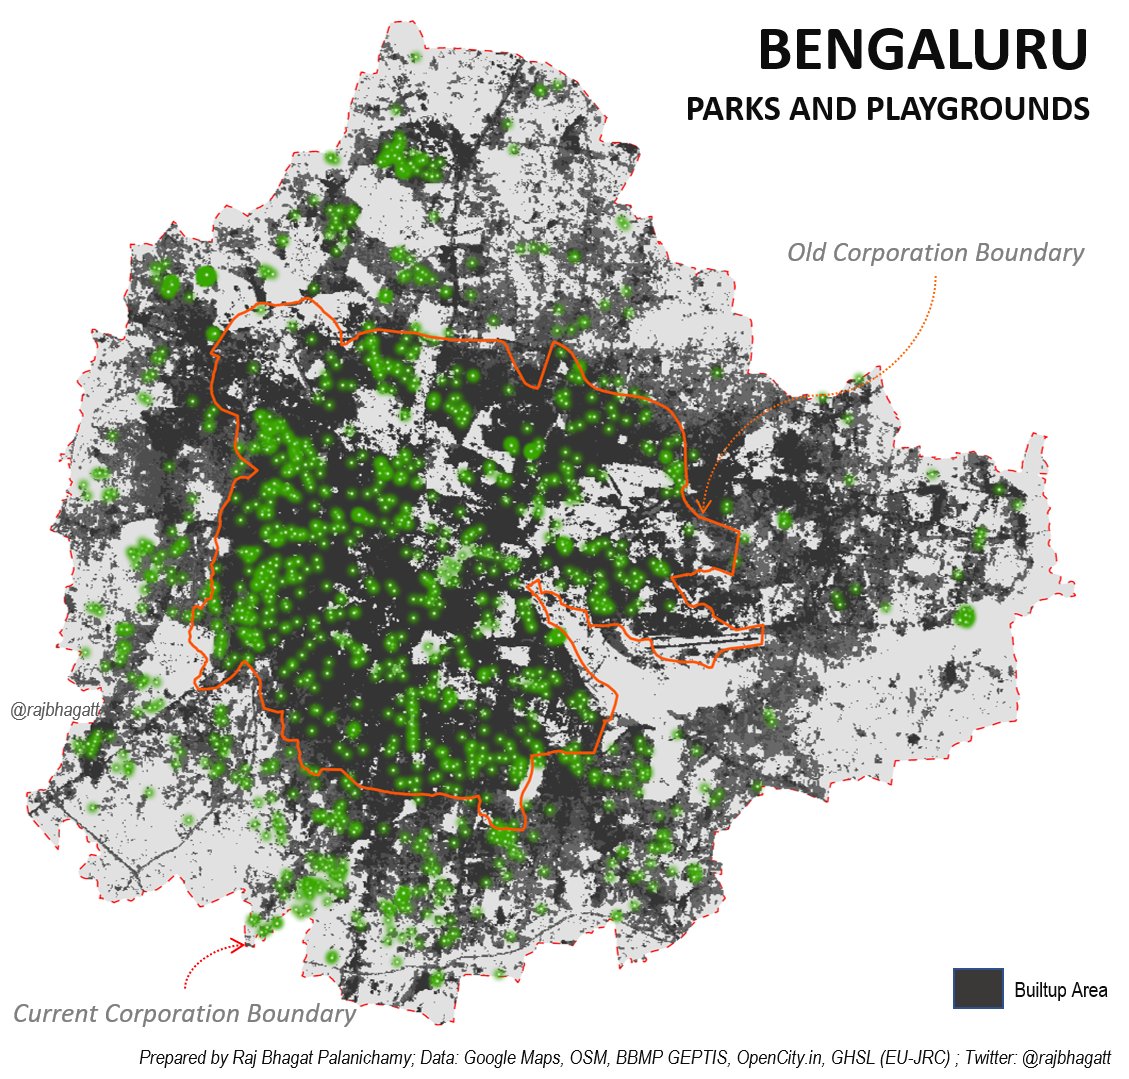  #30DayMapChallenge Map 7: Green #Map shows locations of ~1400 parks & playgrounds in  #Bengaluru using GMaps, OSM, BBMP lists etc shown with backdrop of builtup area. Most of the well maintained parks are within old corp. Lakes, Private spaces fulfill the requirements outside